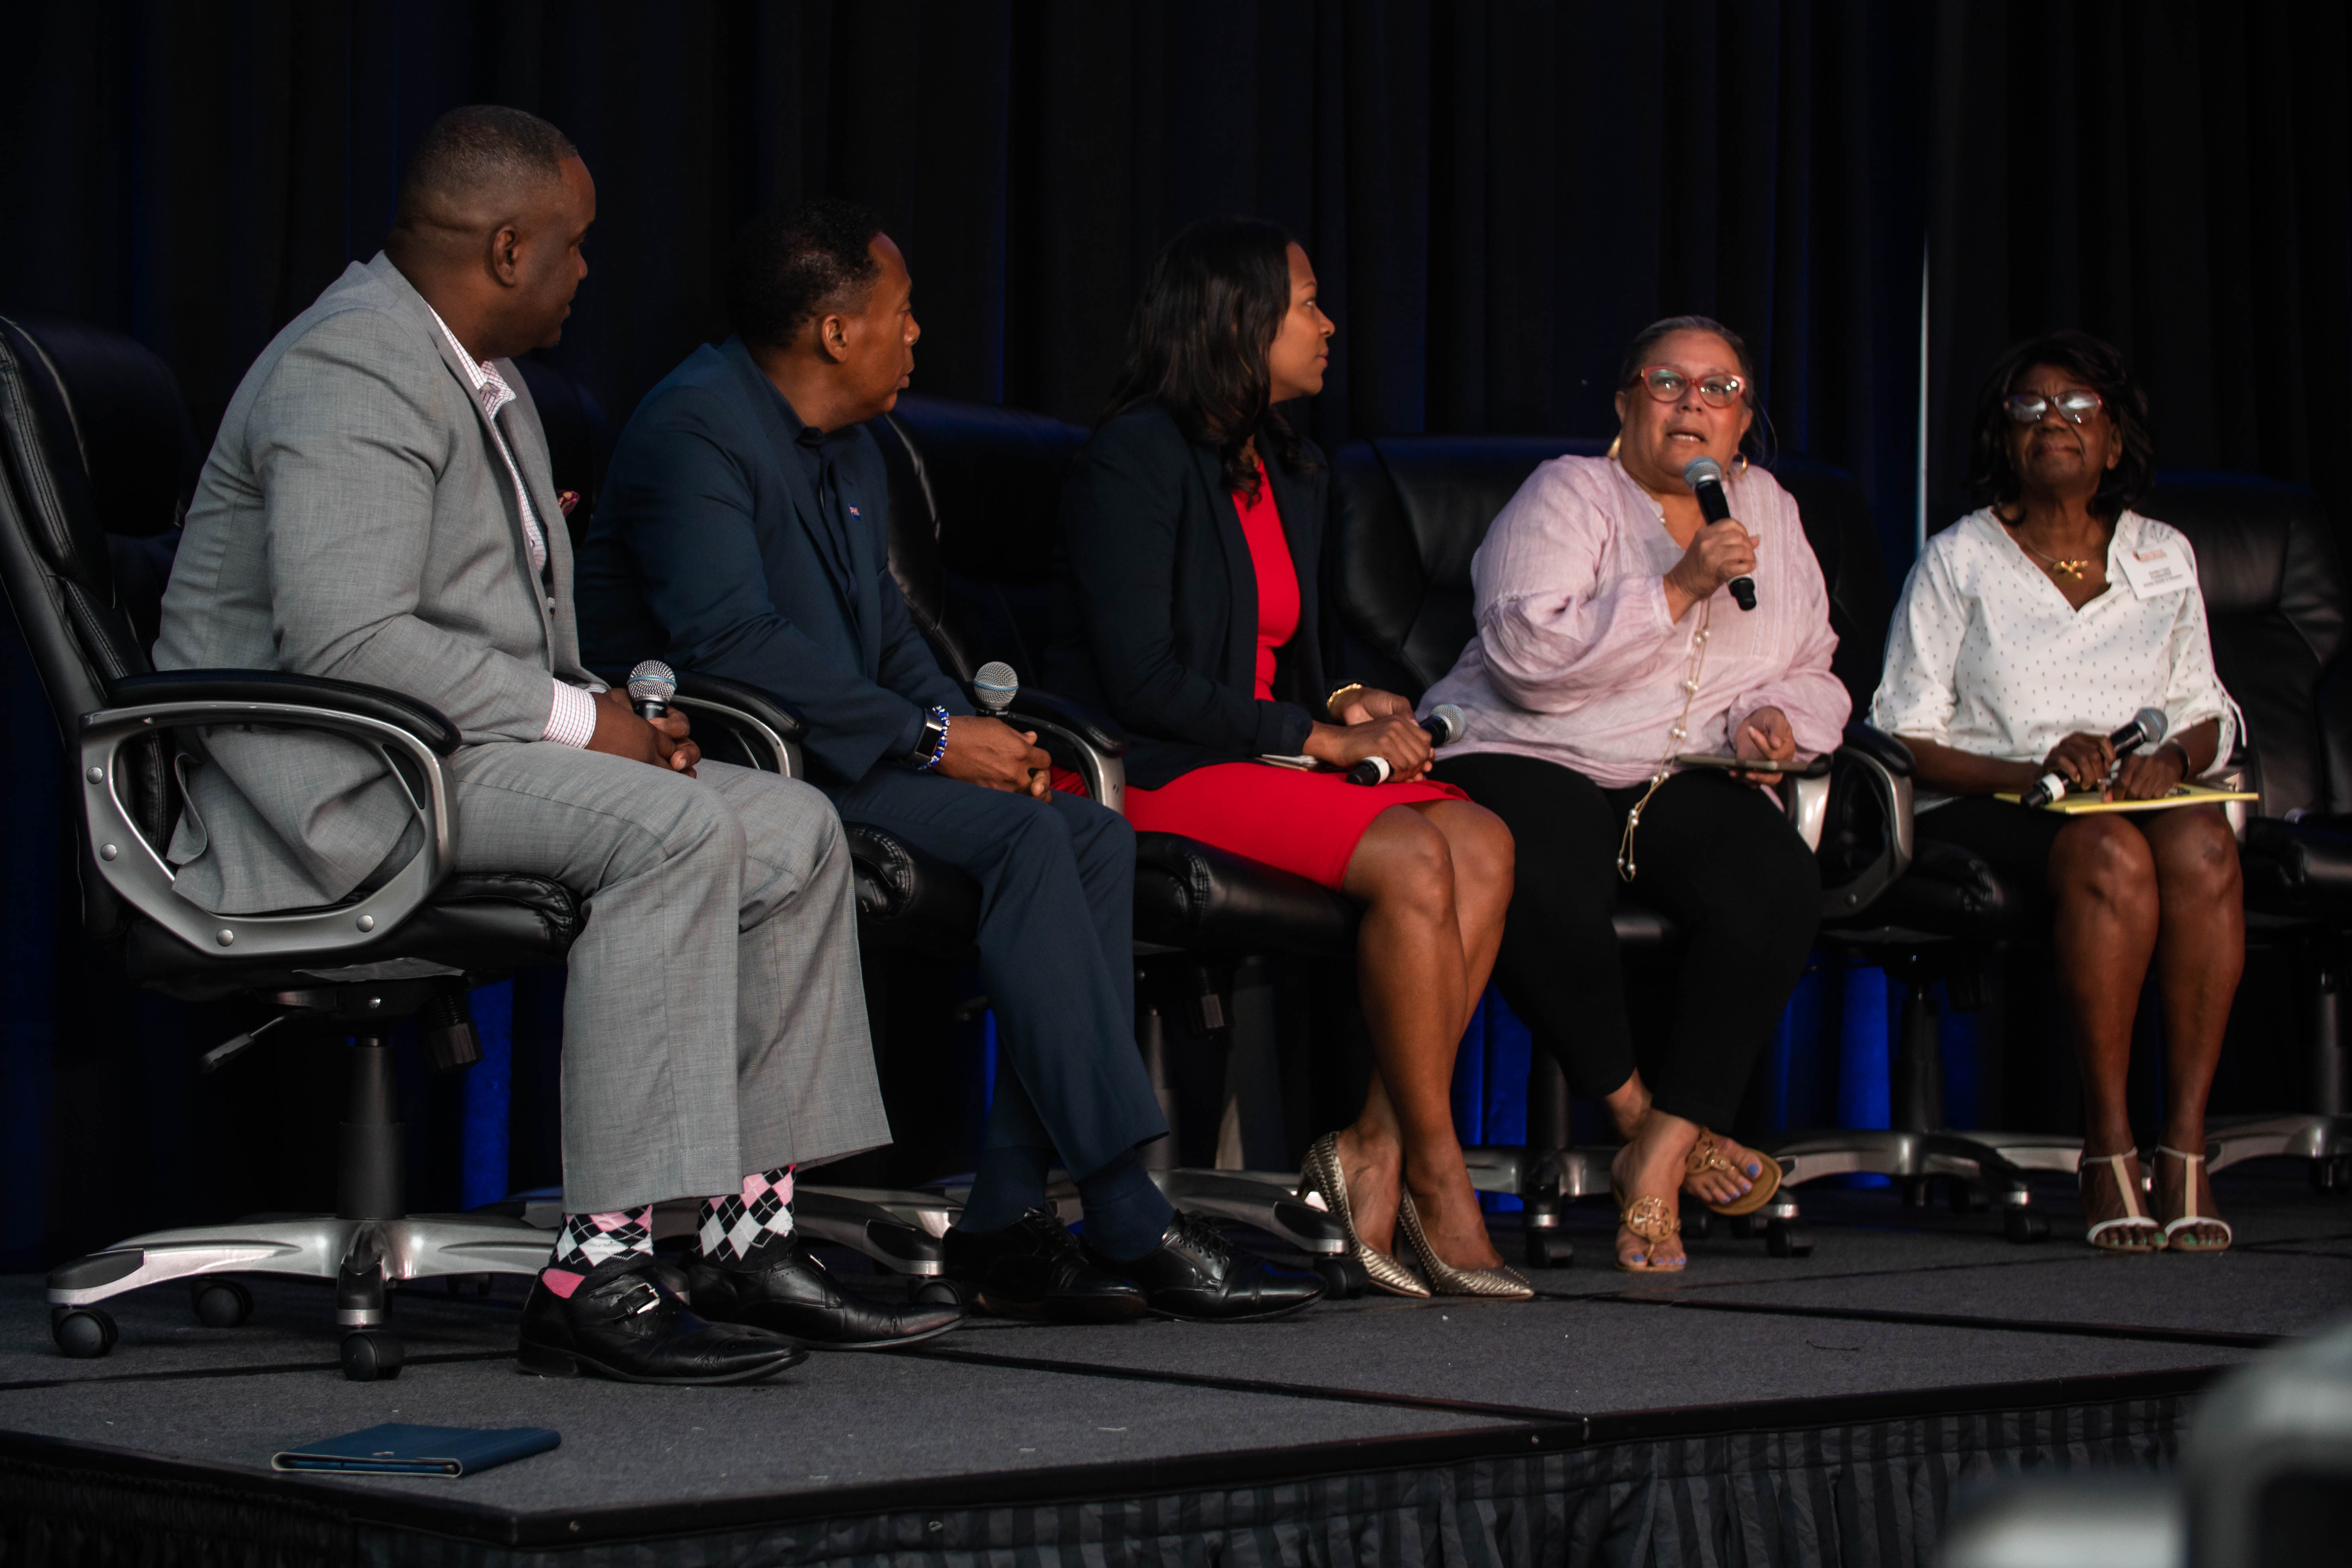 Janet Johnson, CEO and Executive Director of The Bahamas Tourism Development Corp (TDC), represented The Islands Of The Bahamas on a panel at the recent International Multicultural and Heritage Tourism Network Conference in Miami, Florida.  The topic of d